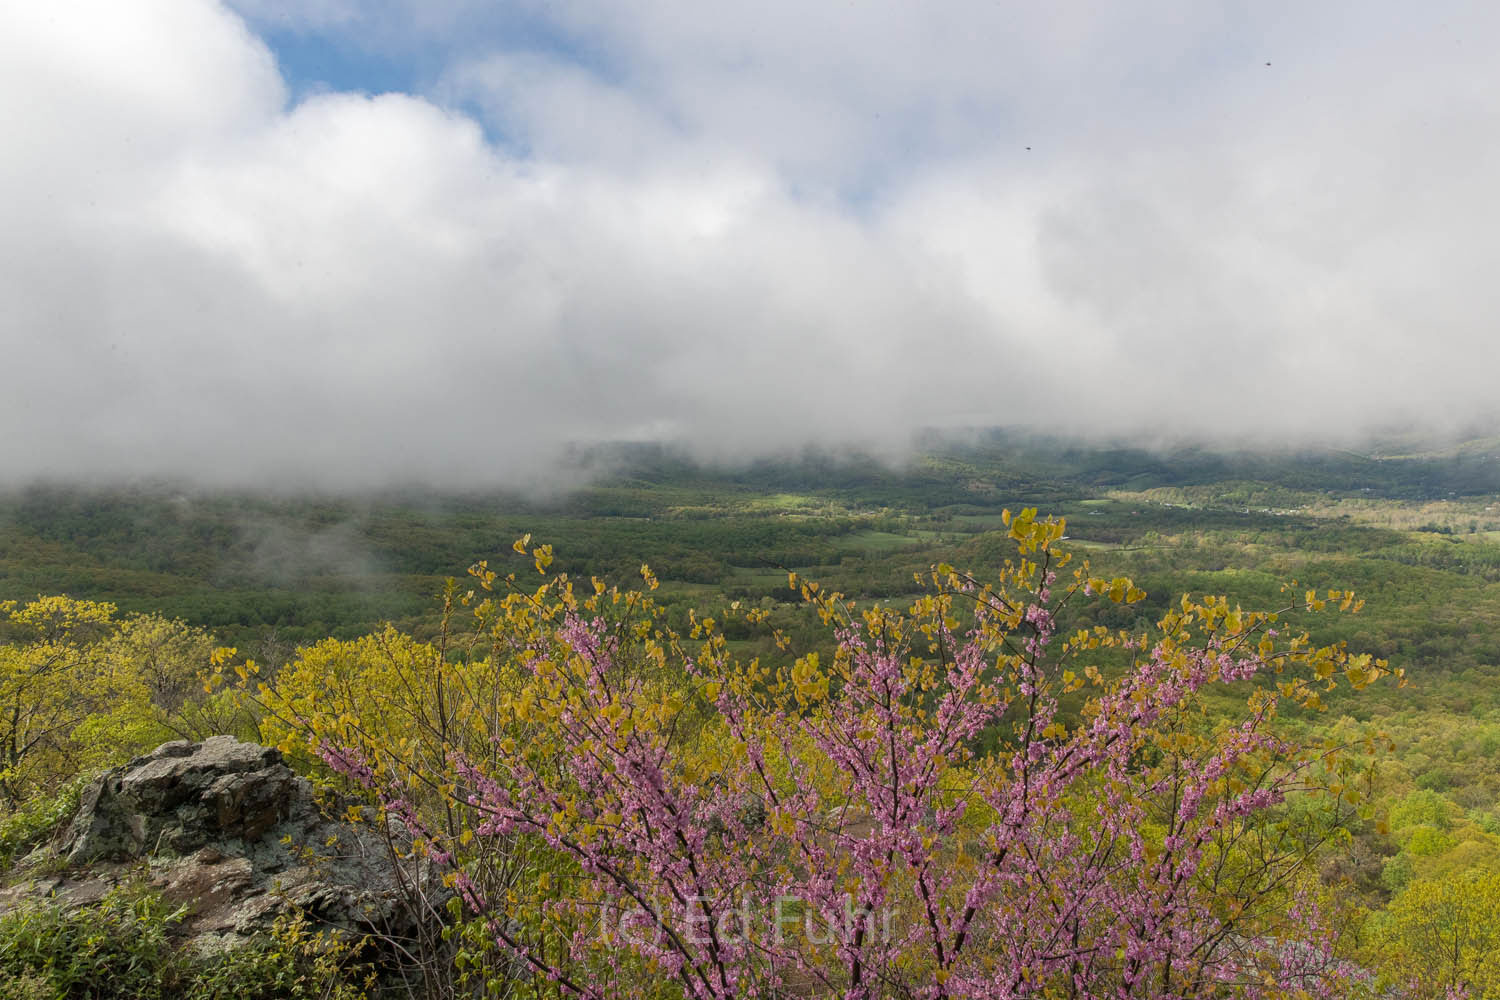 One of the finest displays of redbuds can be found near the northern terminus of Skyline Drive.